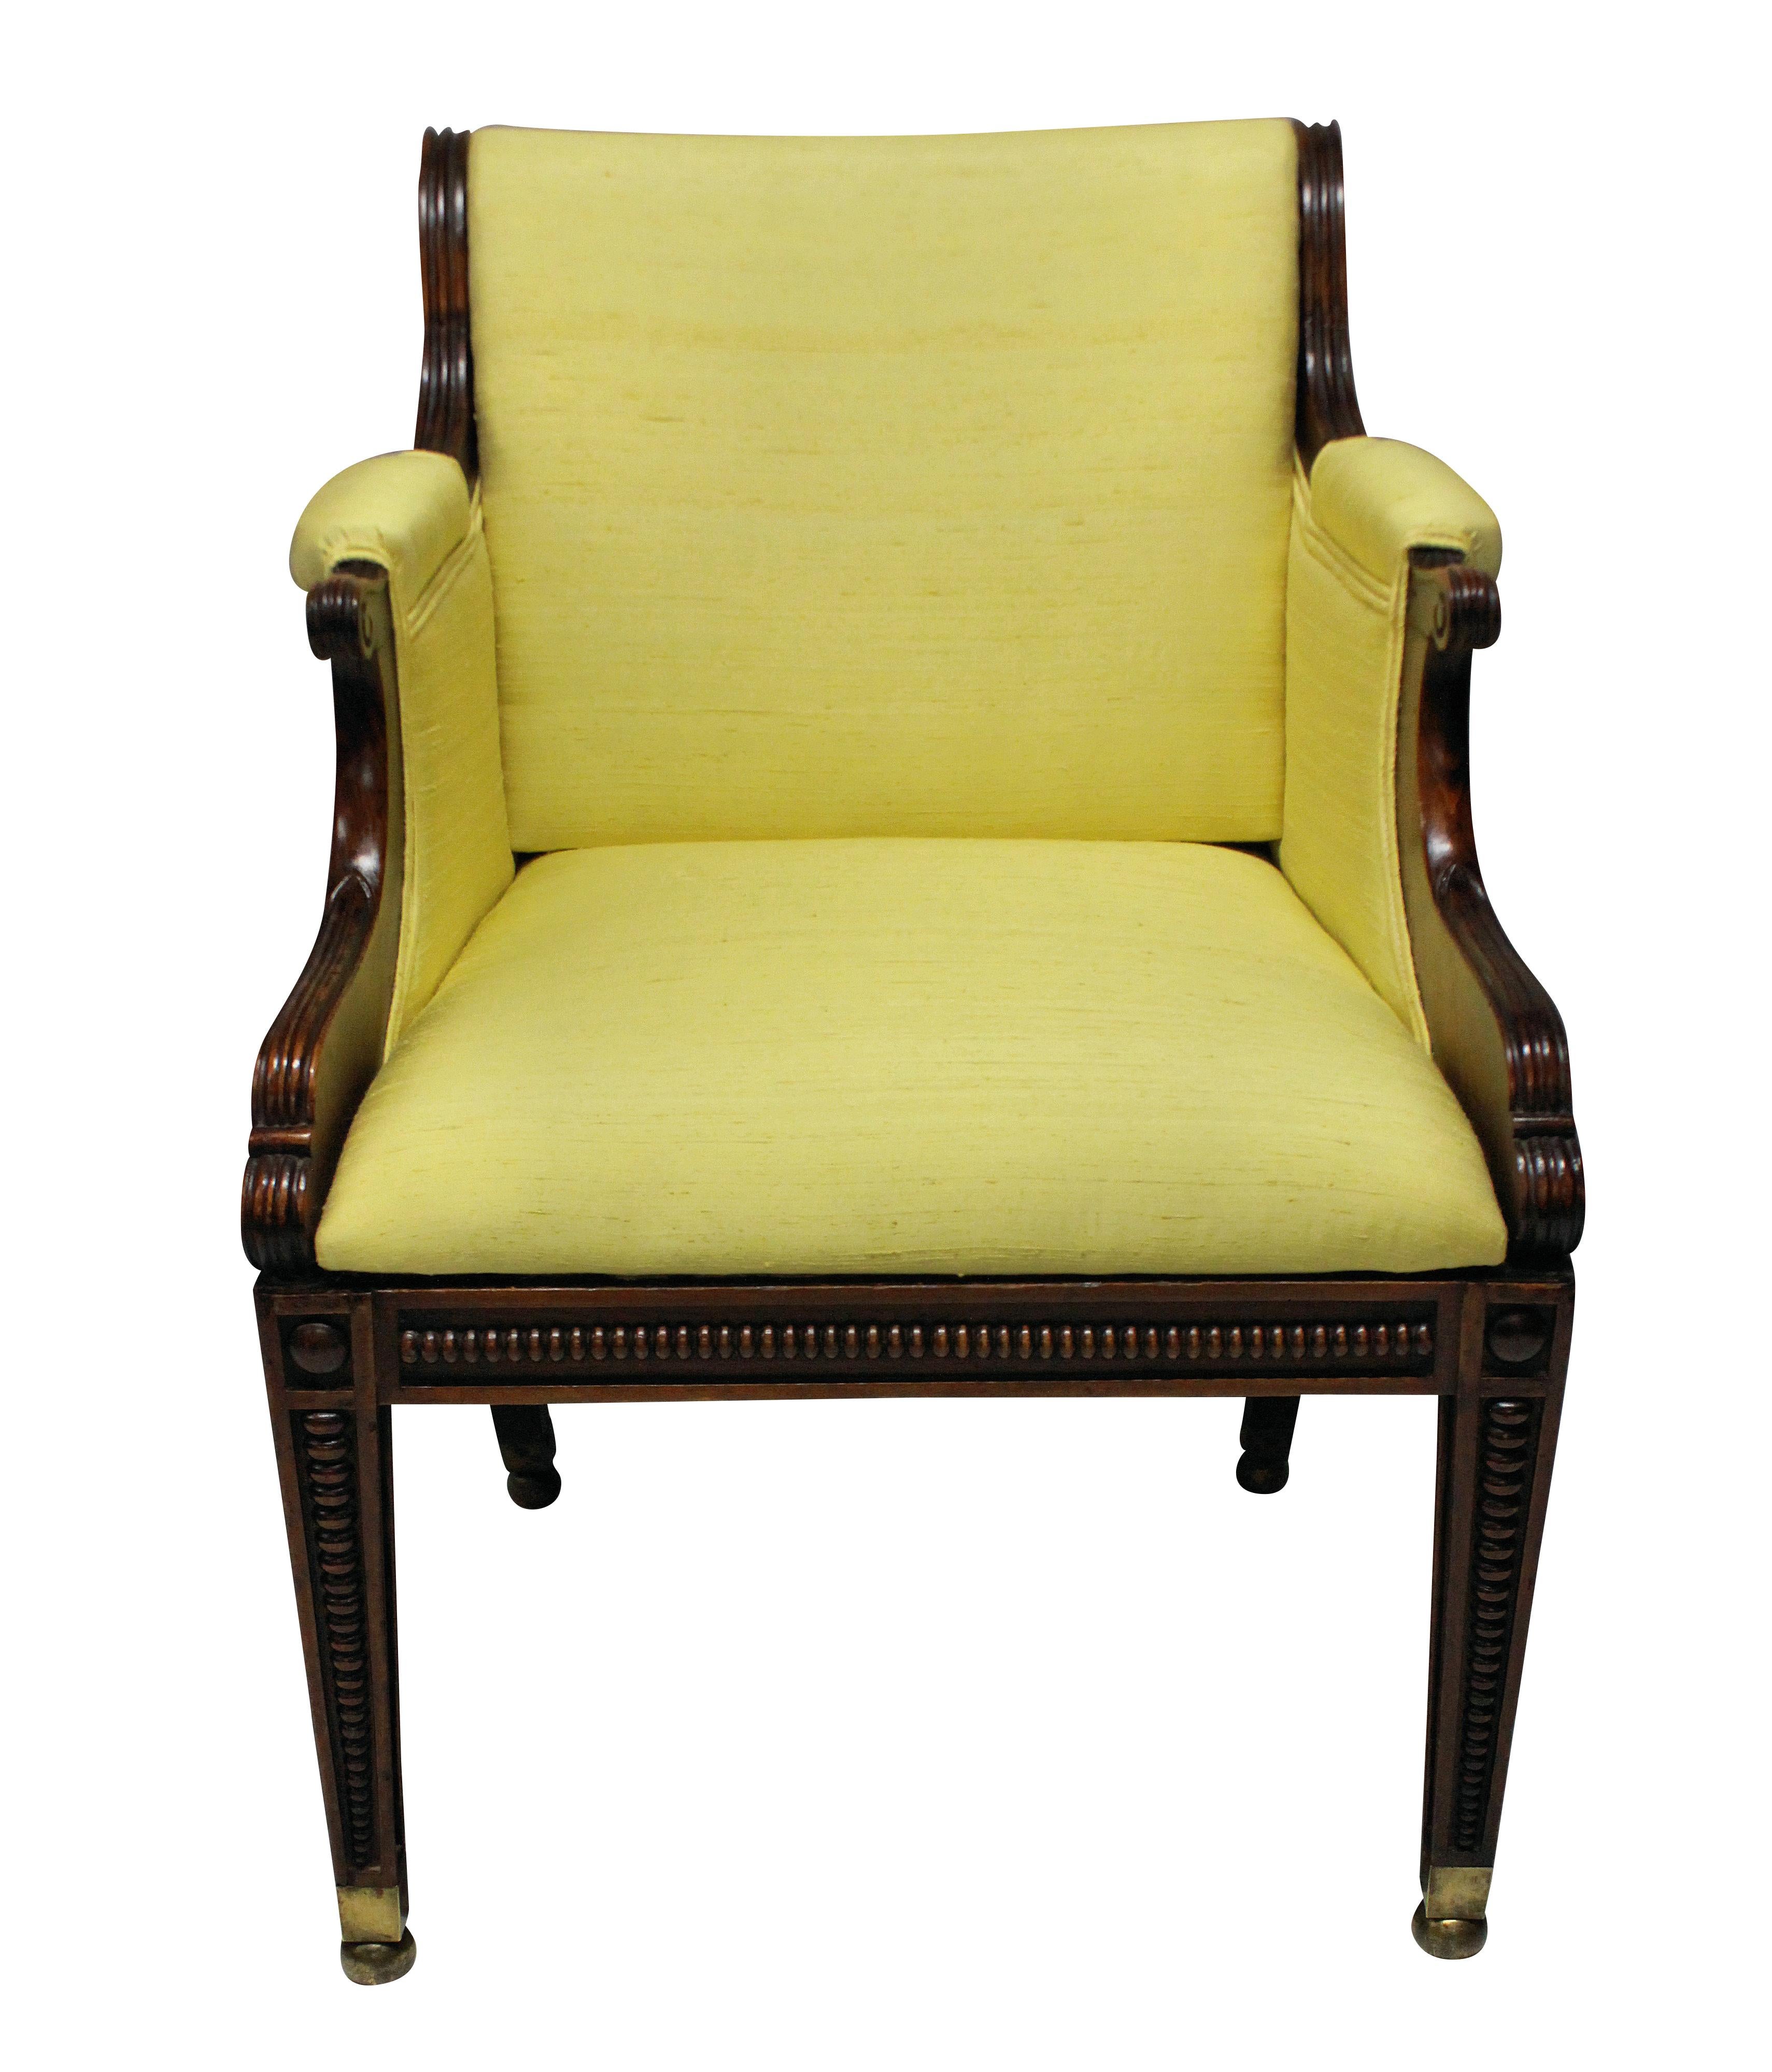 A fine English faux rosewood library chair of unusual design, with graduated tapering spheres down the legs, with brass ball feet. Newly upholstered in pale yellow silk.